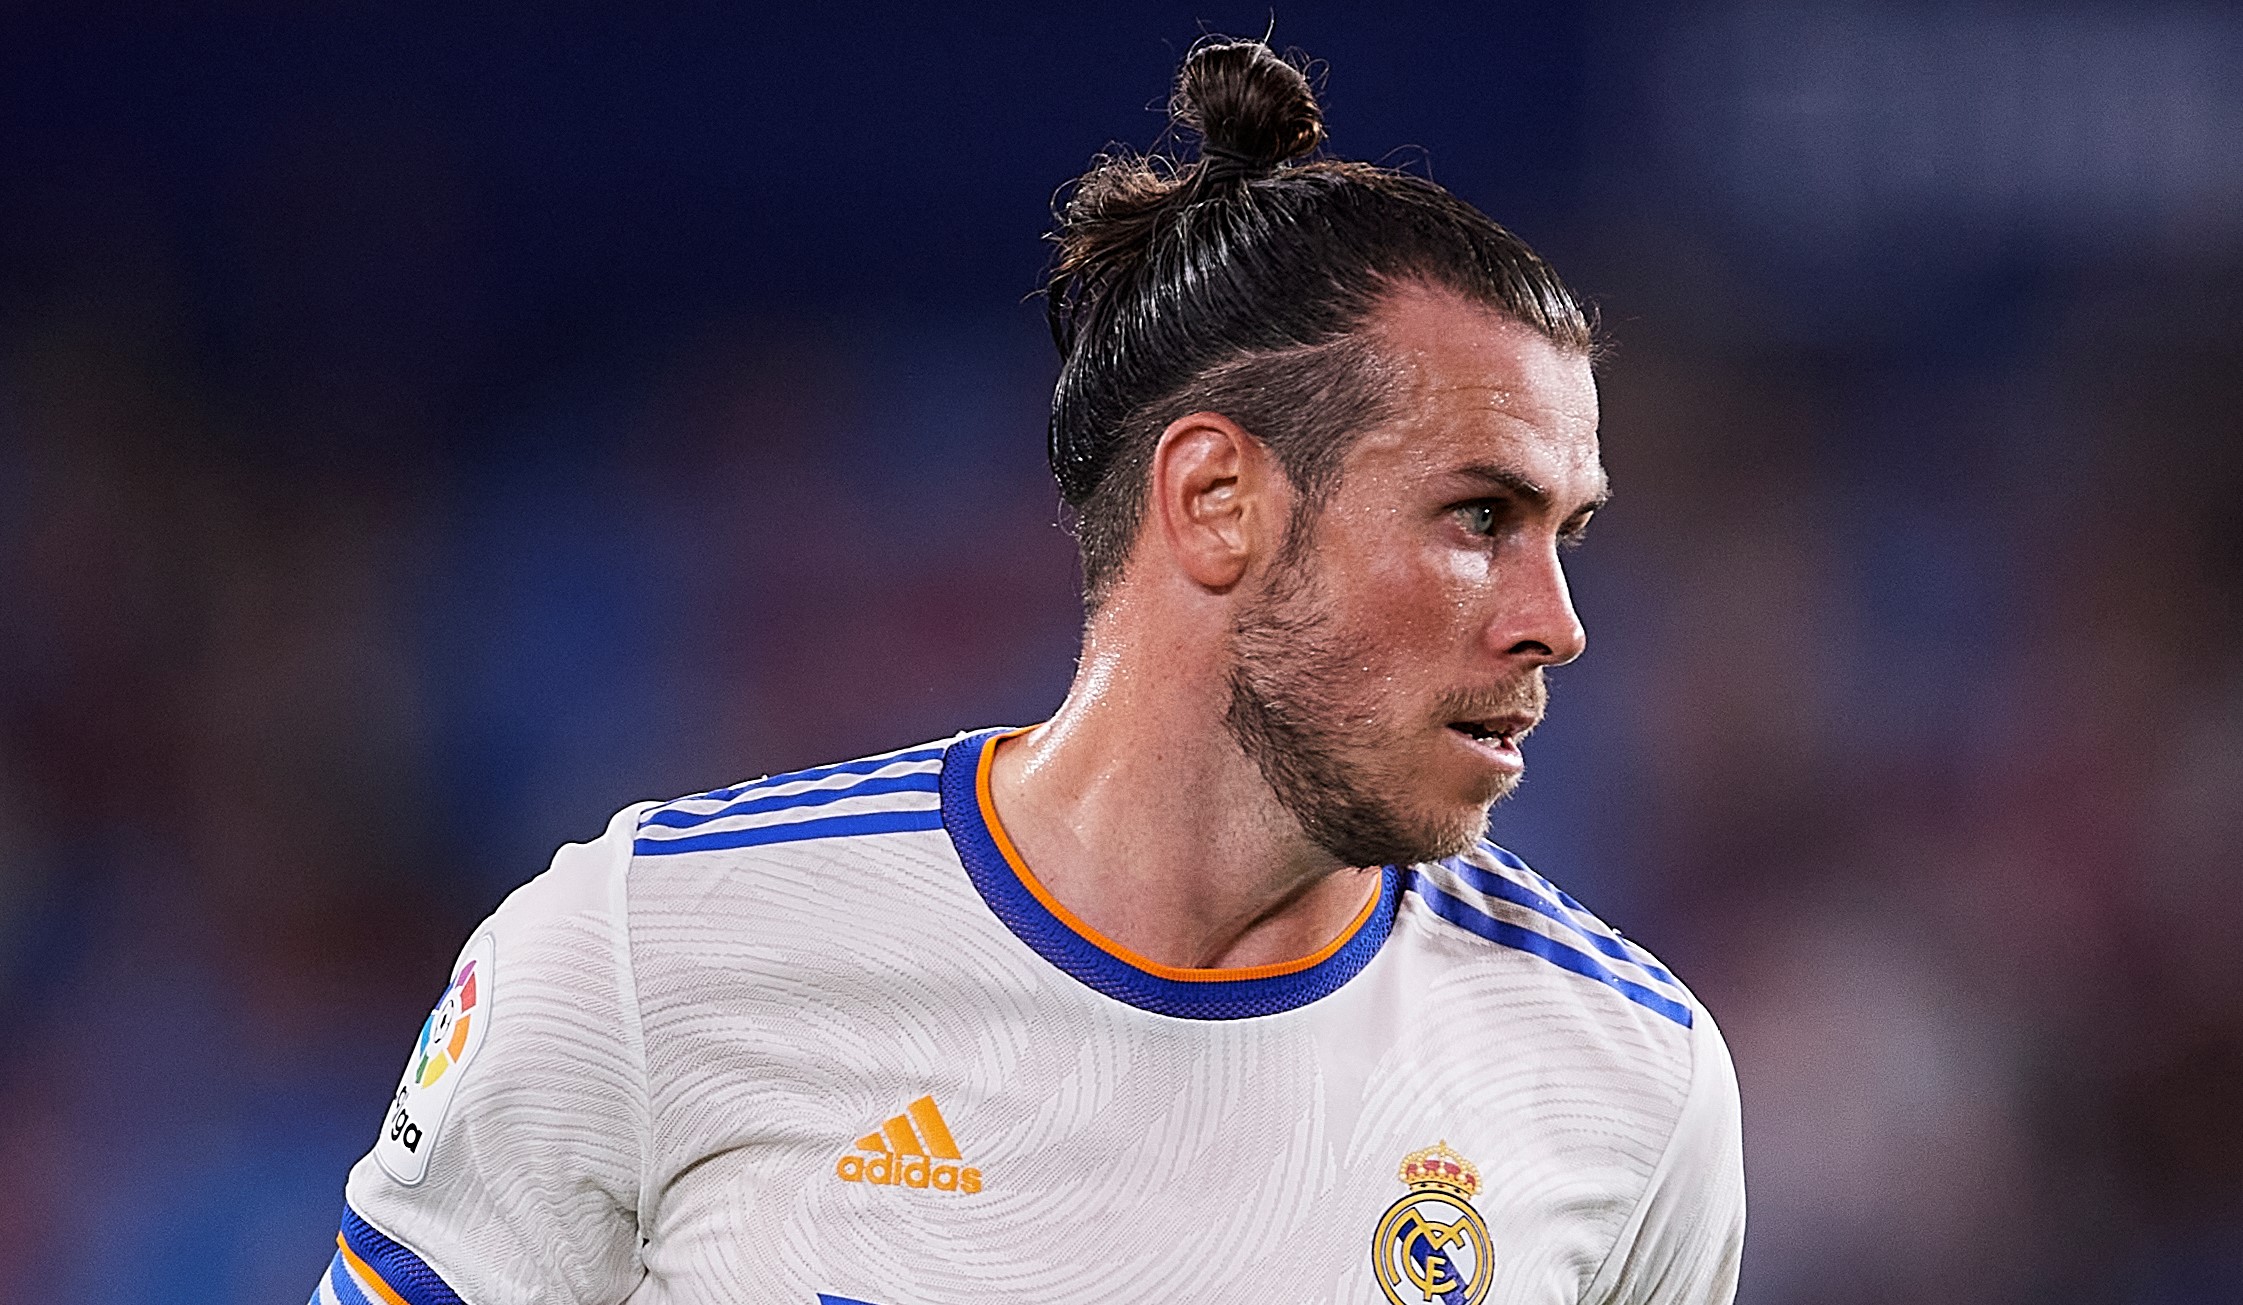 Gareth Bale is set to leave Real Madrid at the end of the season